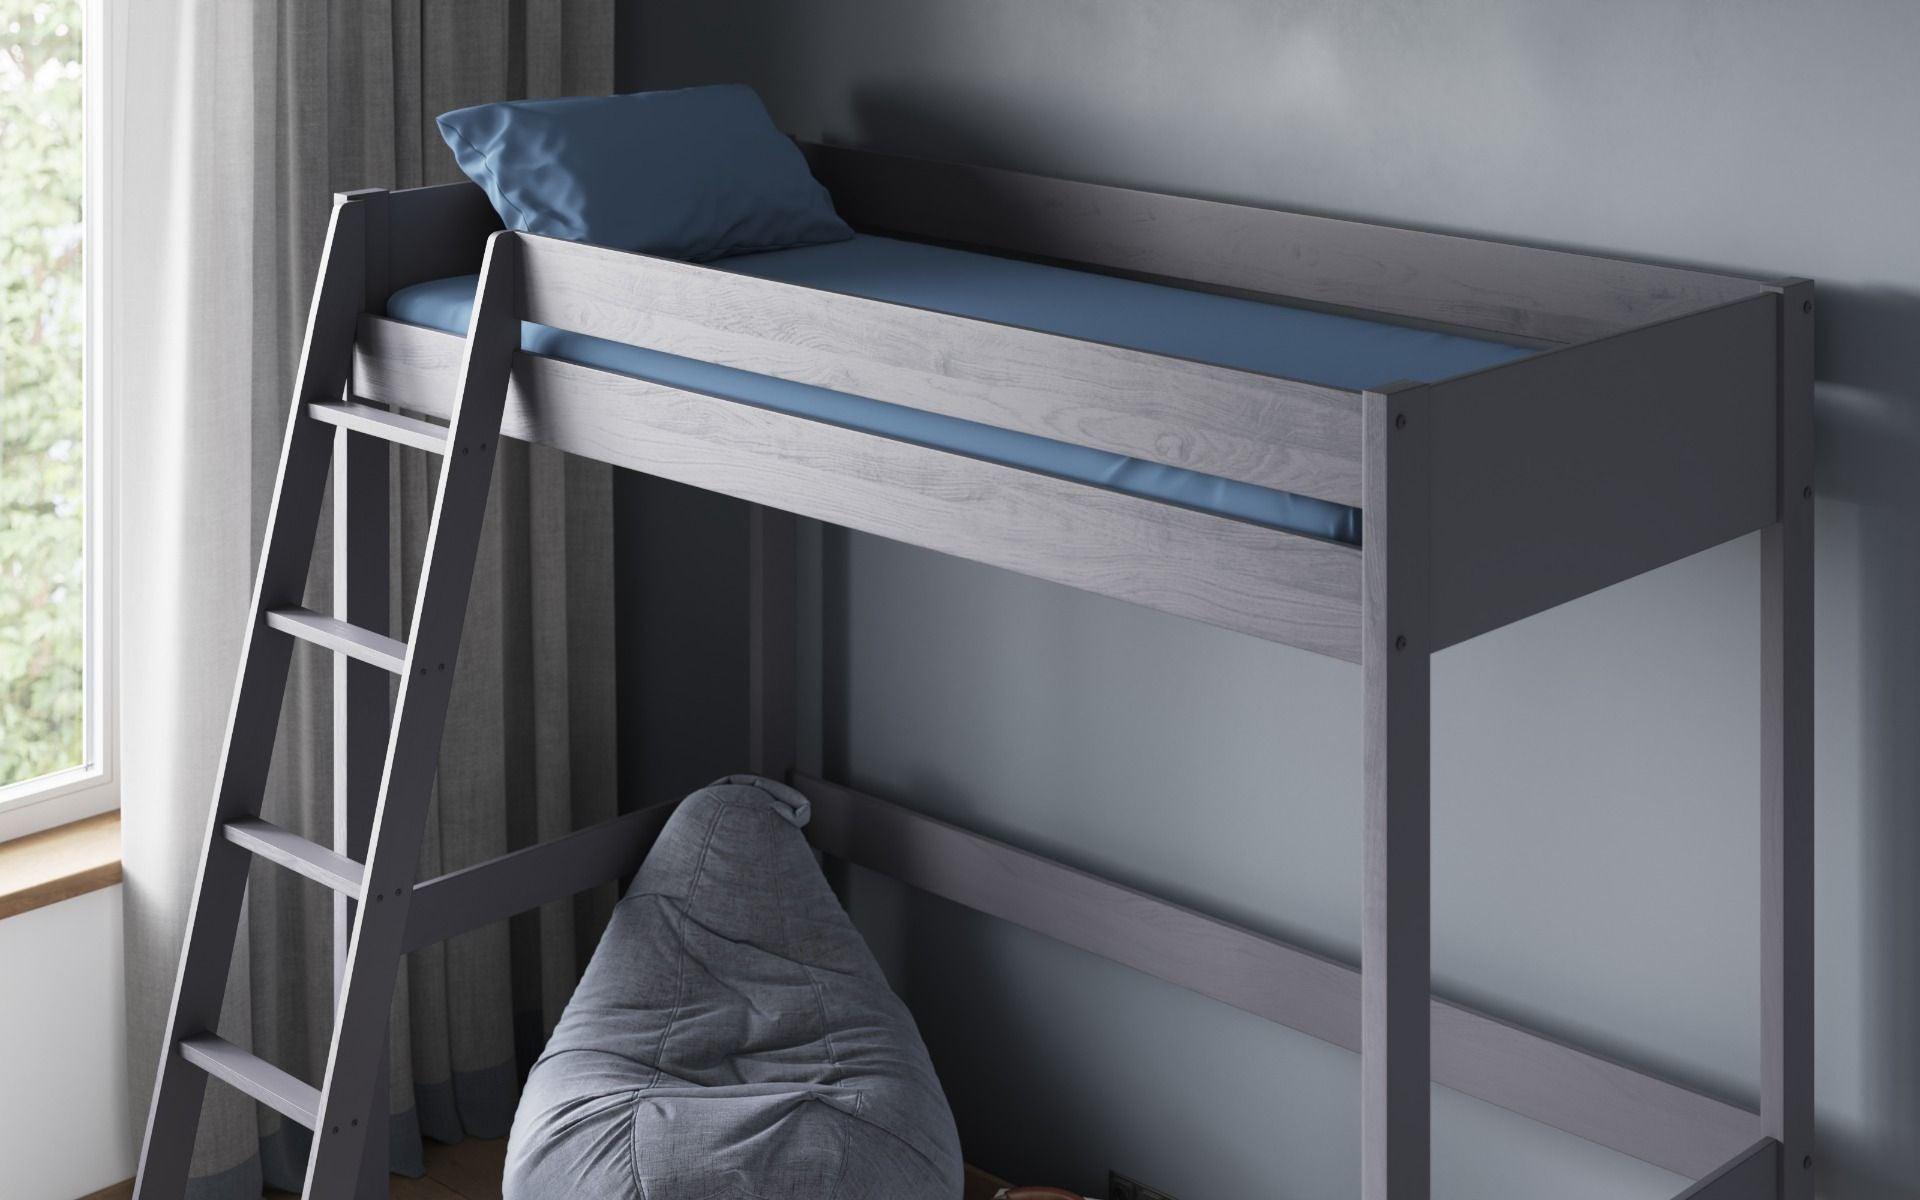 Noomi Small Double High Sleeper Bunk Bed Frame in Grey - Complete Comfort Beds